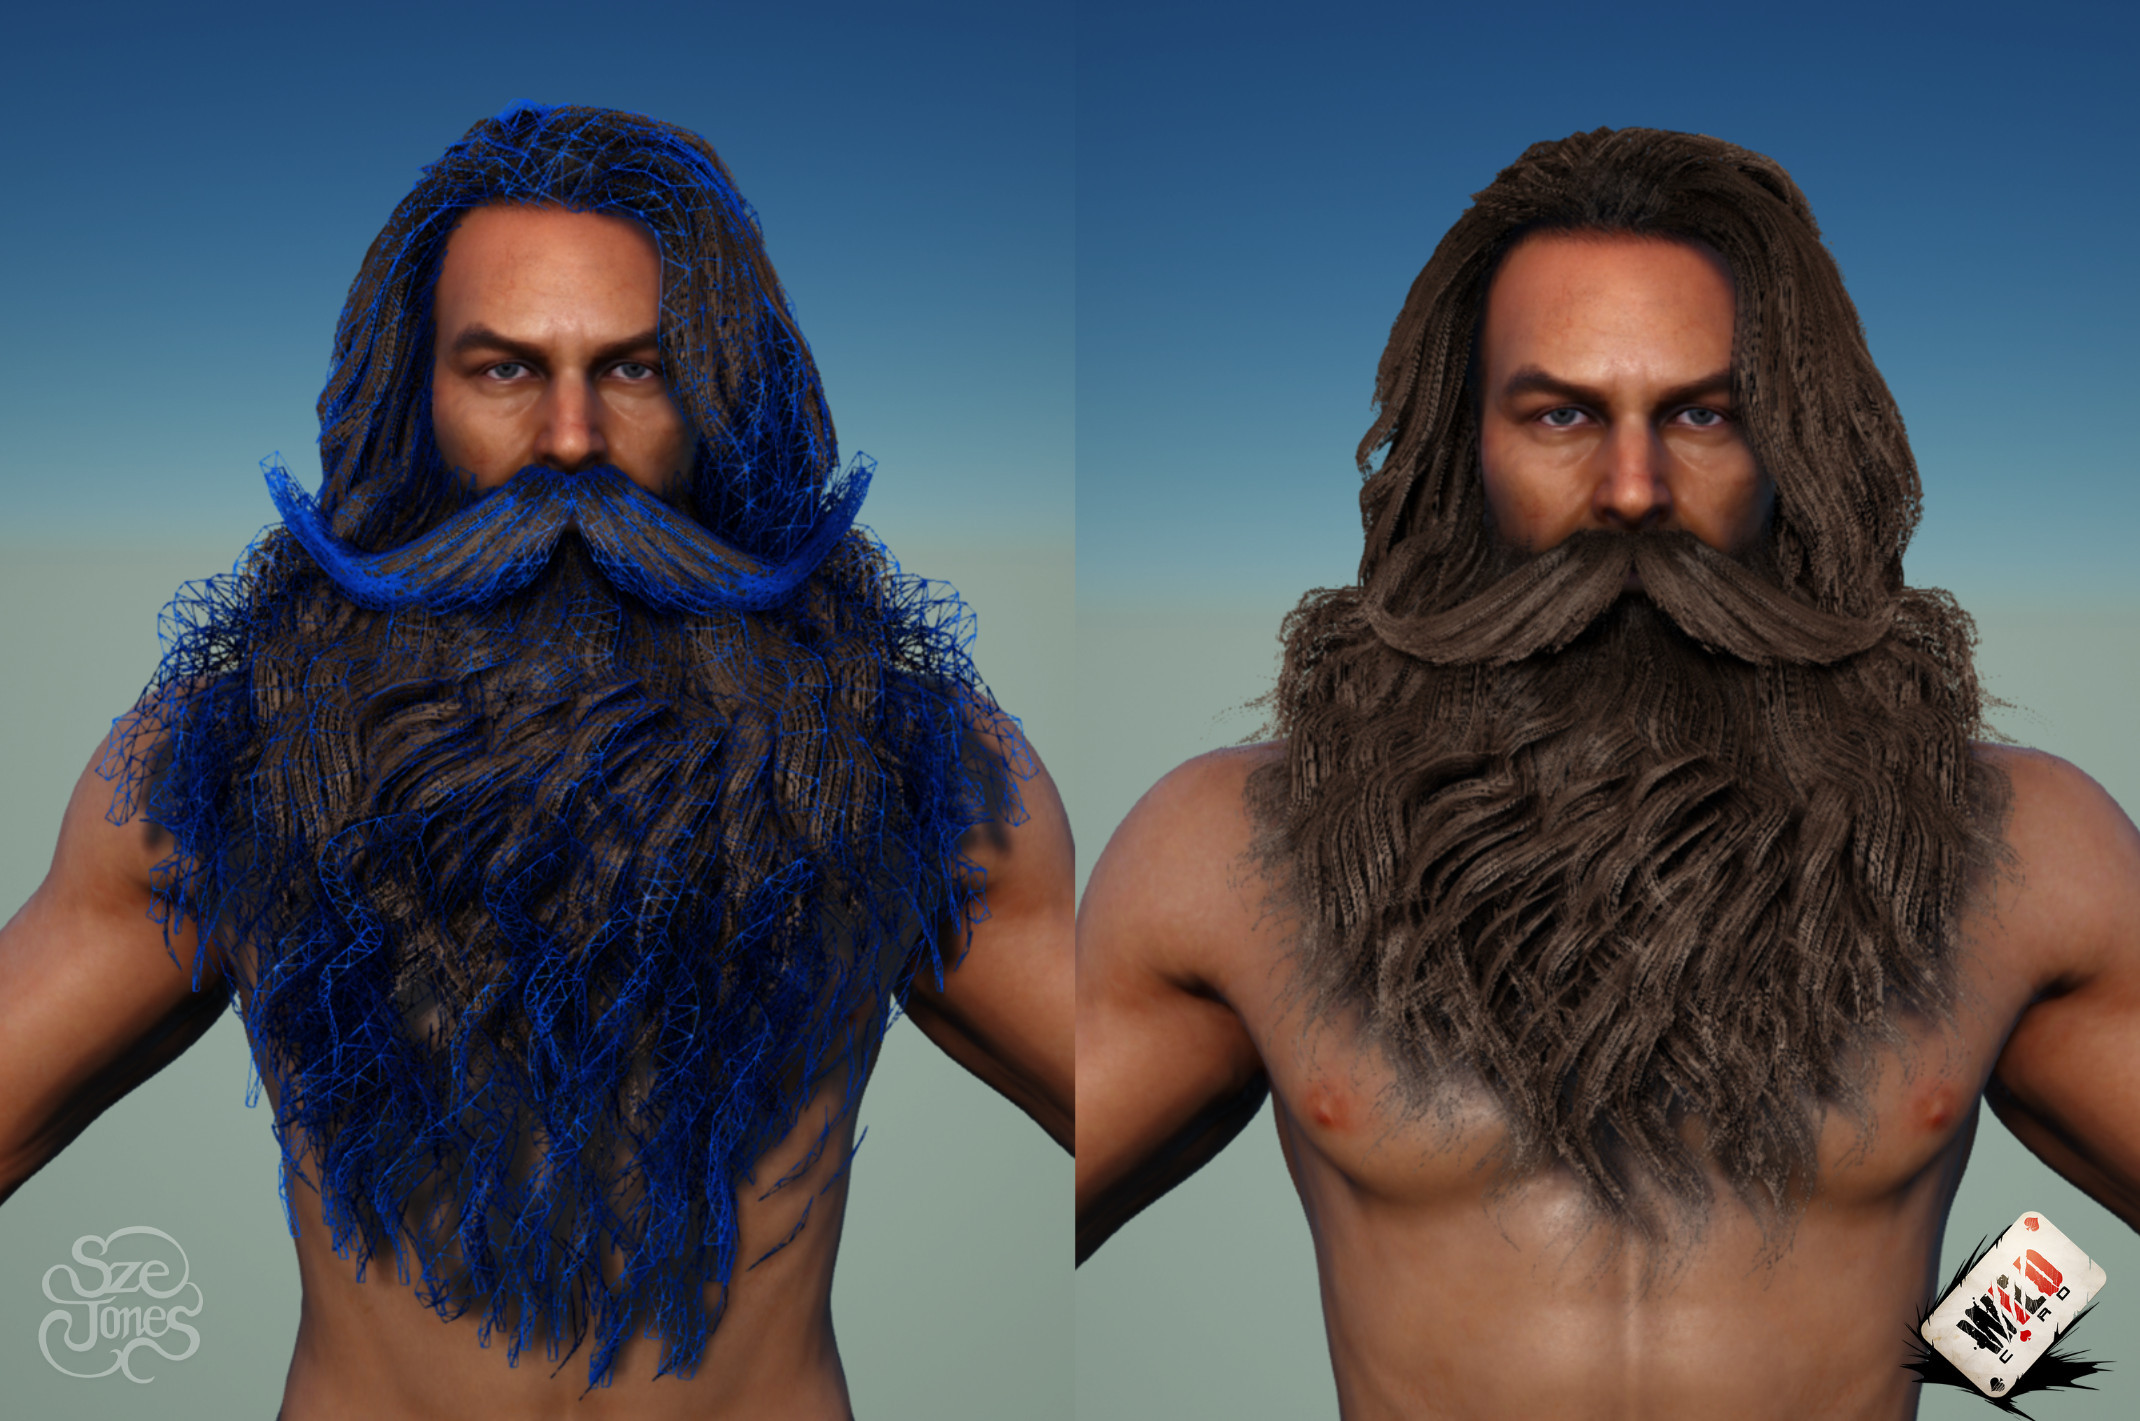 Hair Cards, Hair Shader and Textures in Unreal Engine